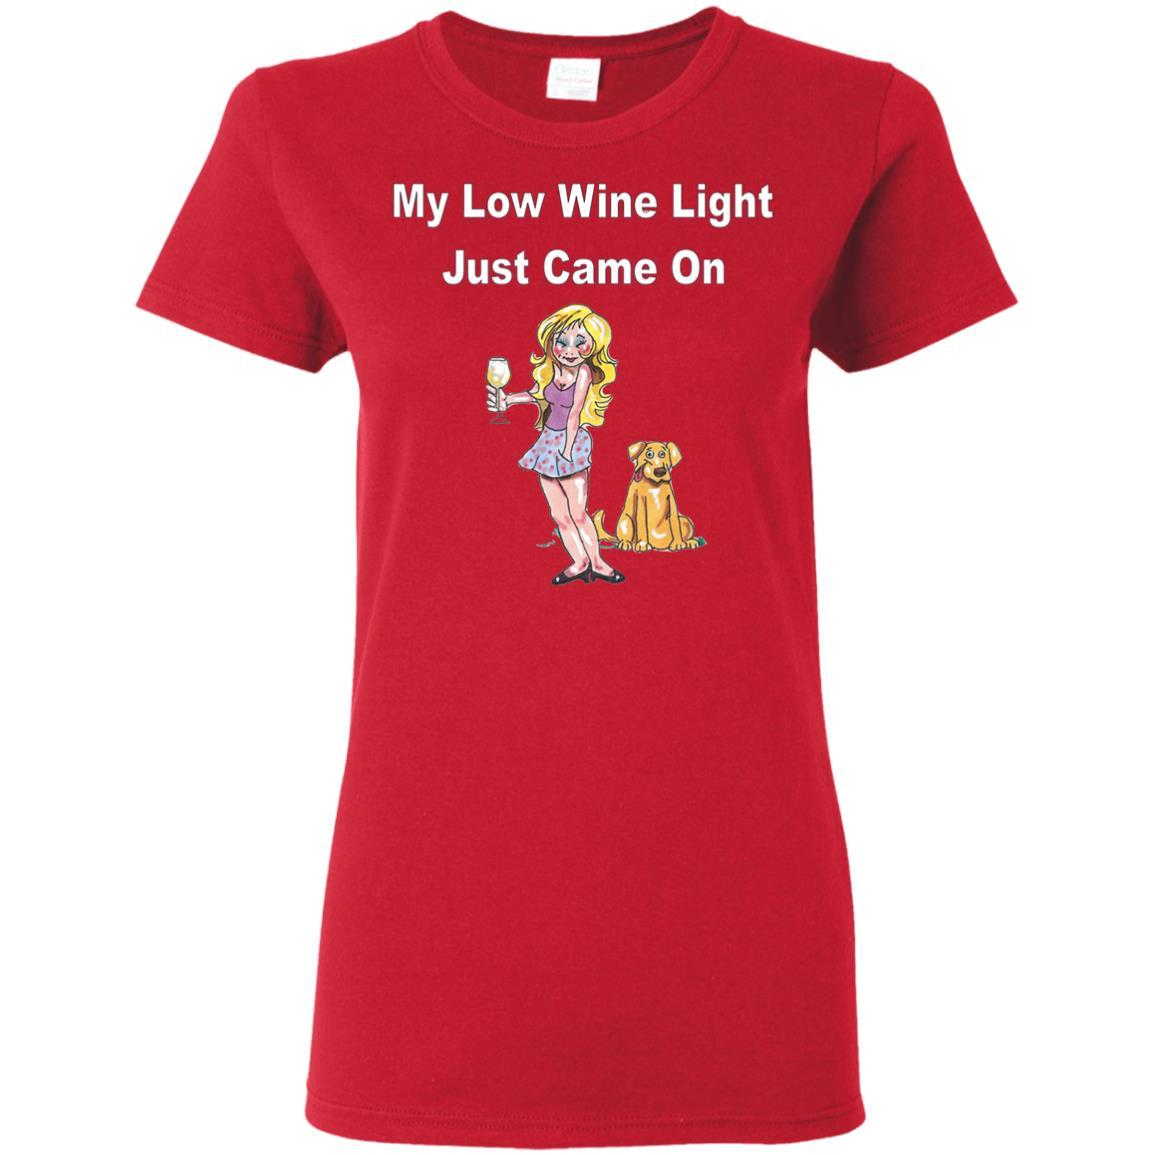 T-Shirts Red / S WineyBitches.co 'Low Wine Light" Ladies' 5.3 oz. T-Shirt WineyBitchesCo